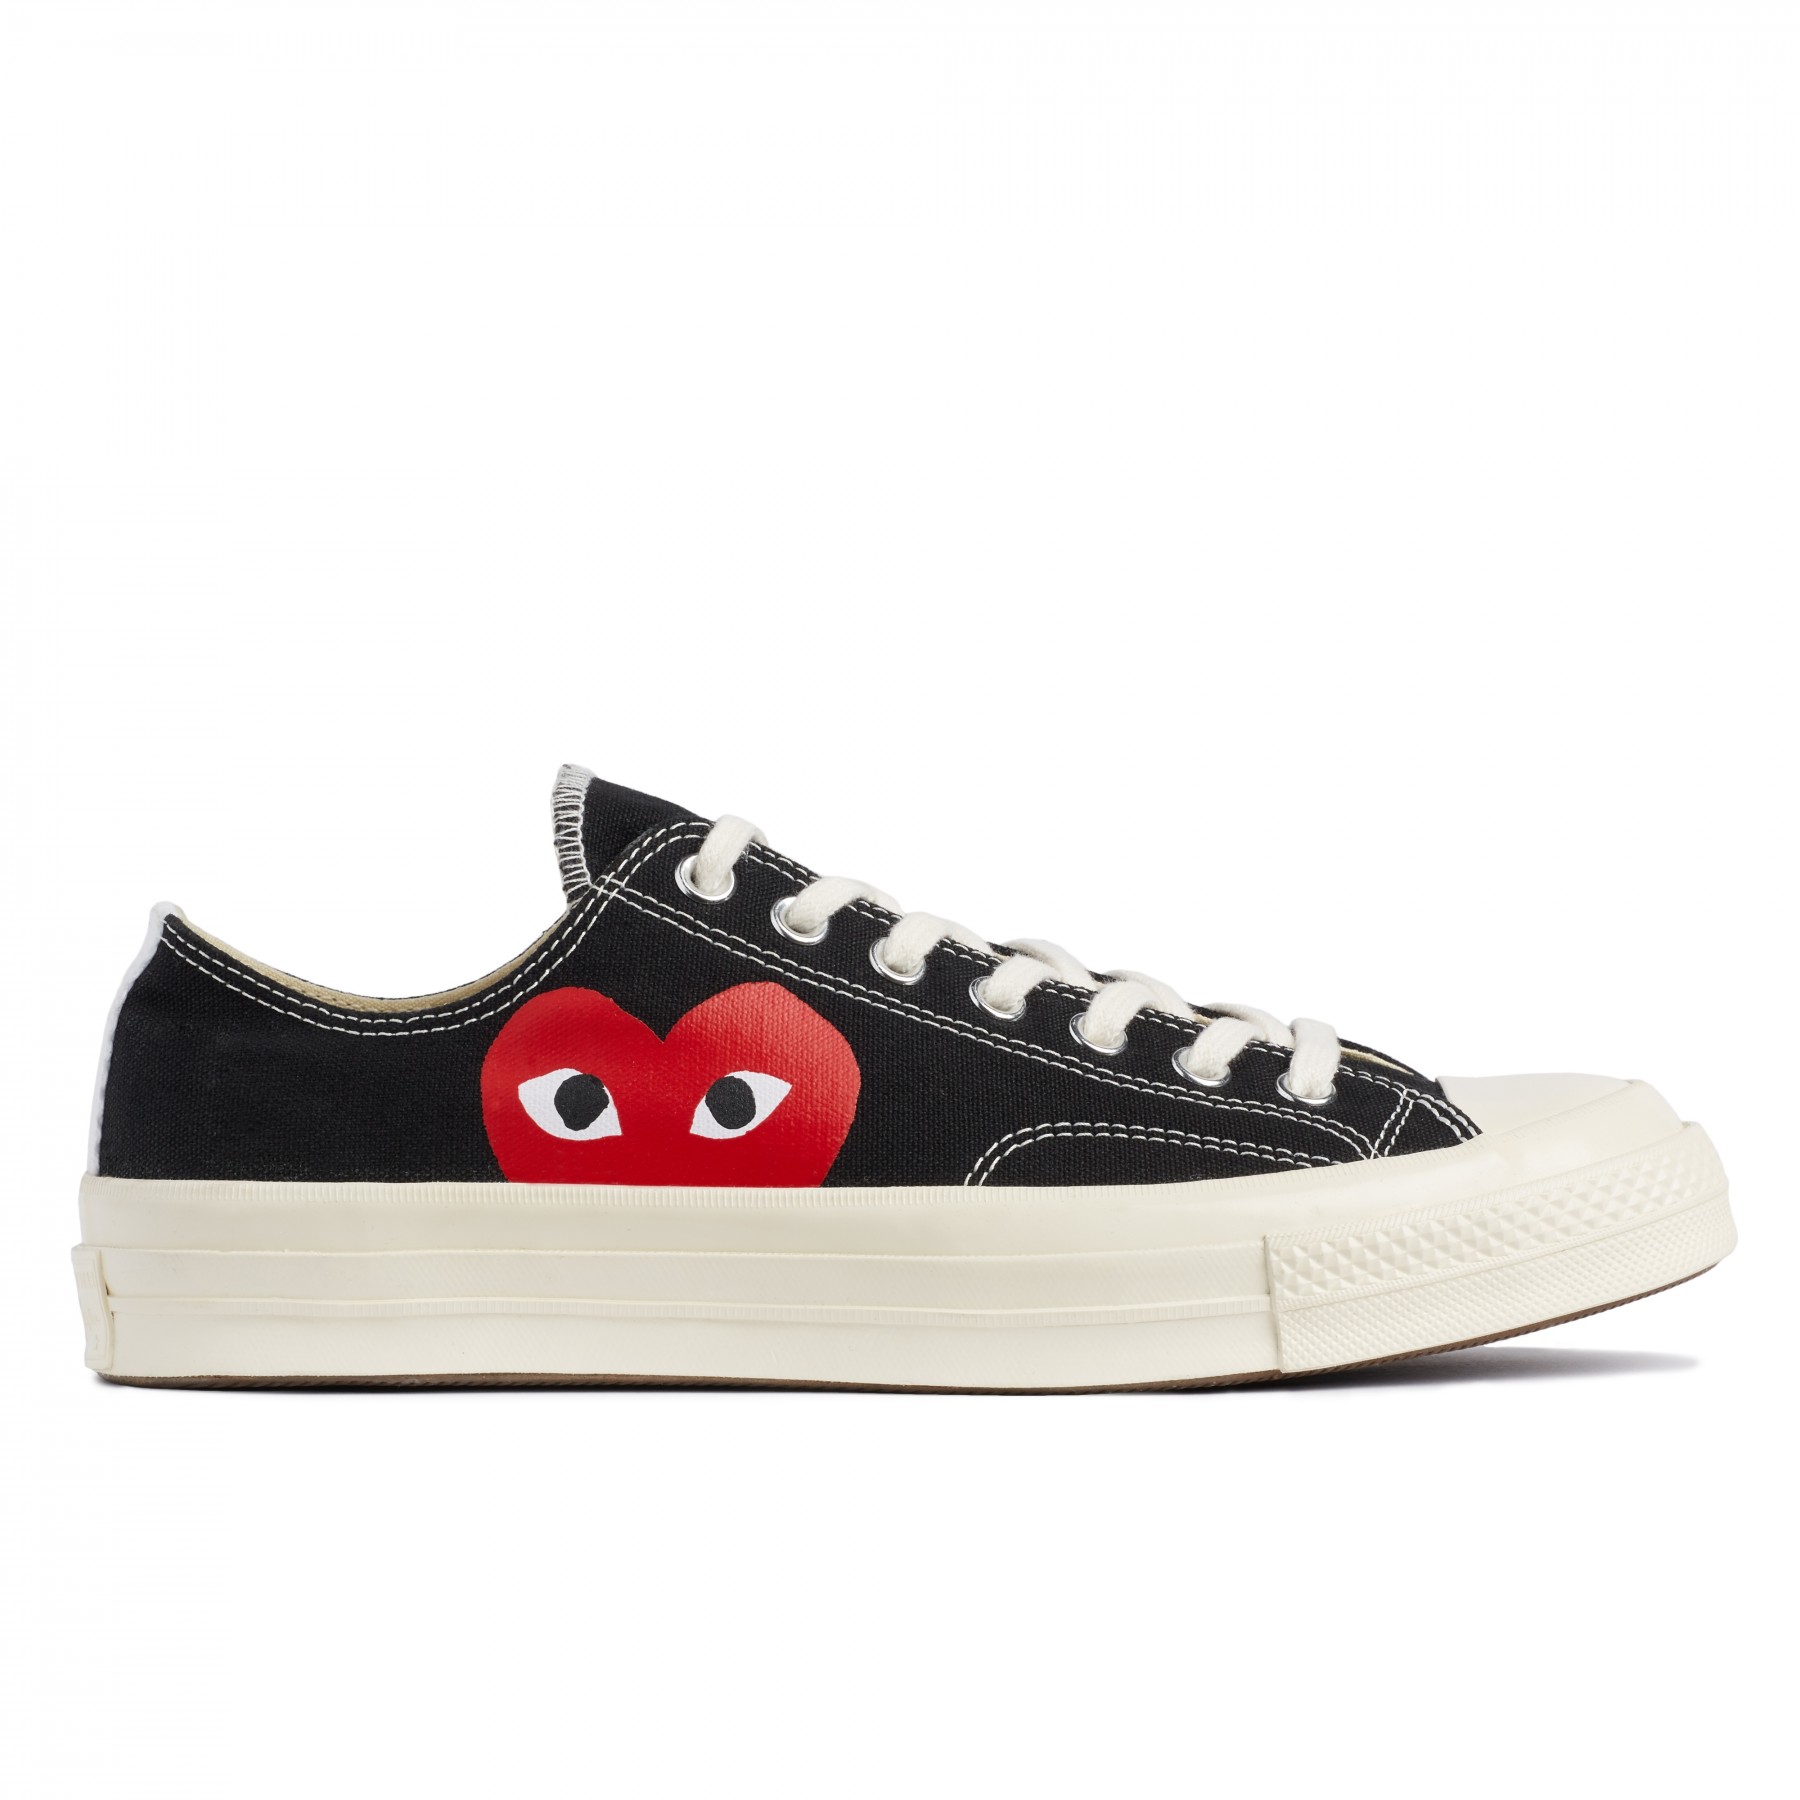 Comme Des Garcons Play X Converse Red Heart Chuck Taylor All Star 70 Low Black Shoes